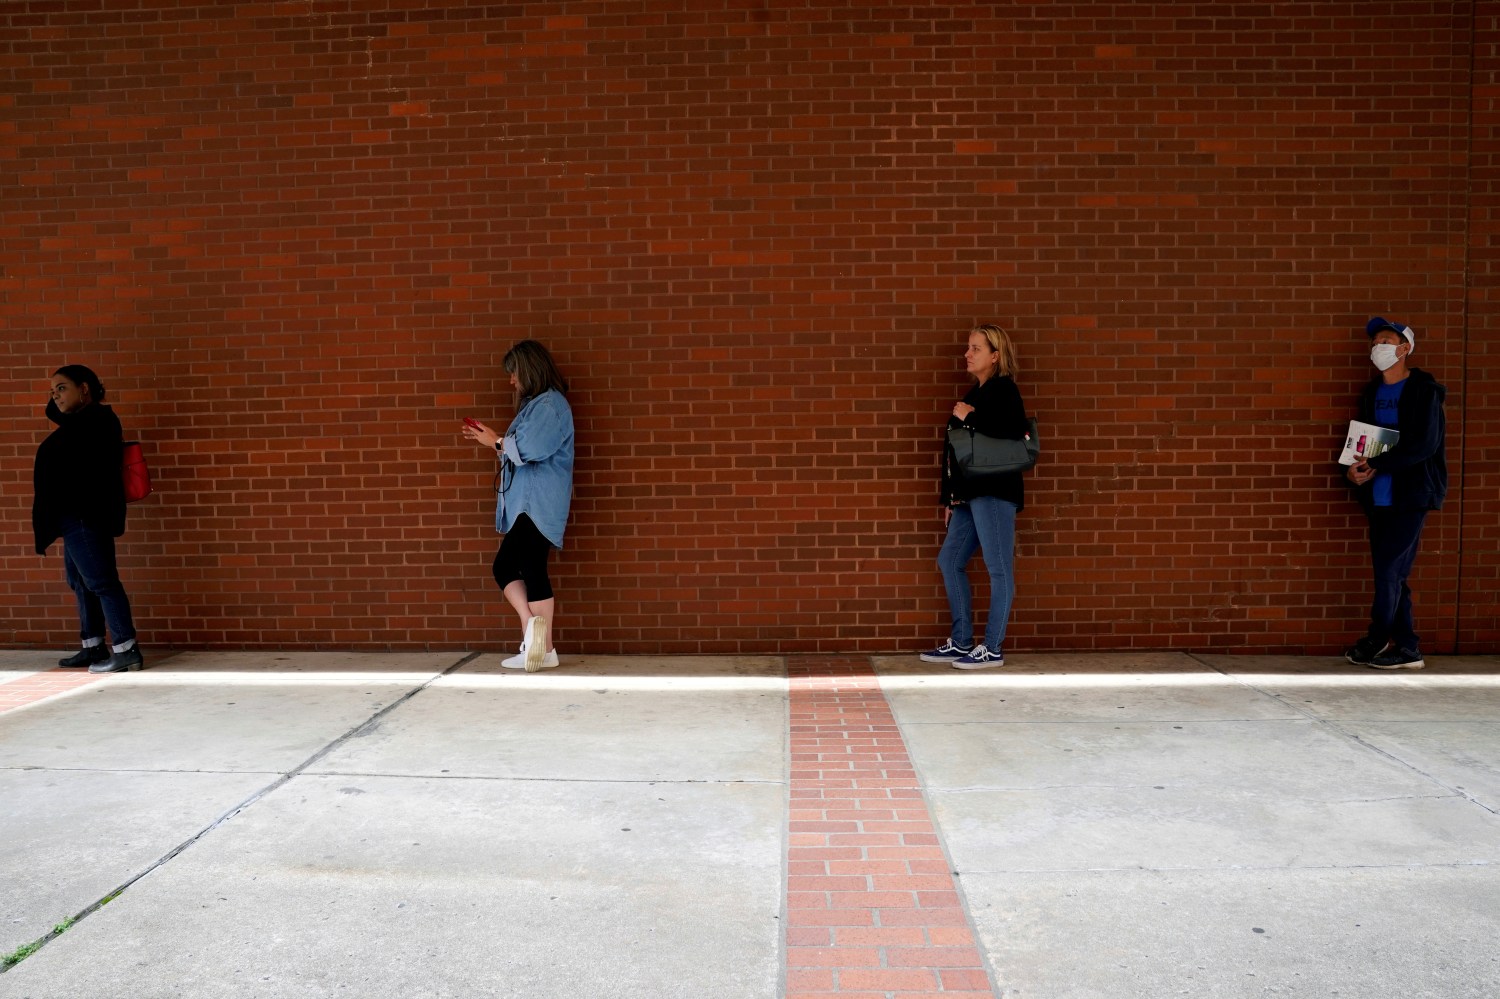 FILE PHOTO: People who lost their jobs wait in line to file for unemployment benefits, following an outbreak of the coronavirus disease (COVID-19), at Arkansas Workforce Center in Fort Smith, Arkansas, U.S. April 6, 2020. REUTERS/Nick Oxford/File Photo